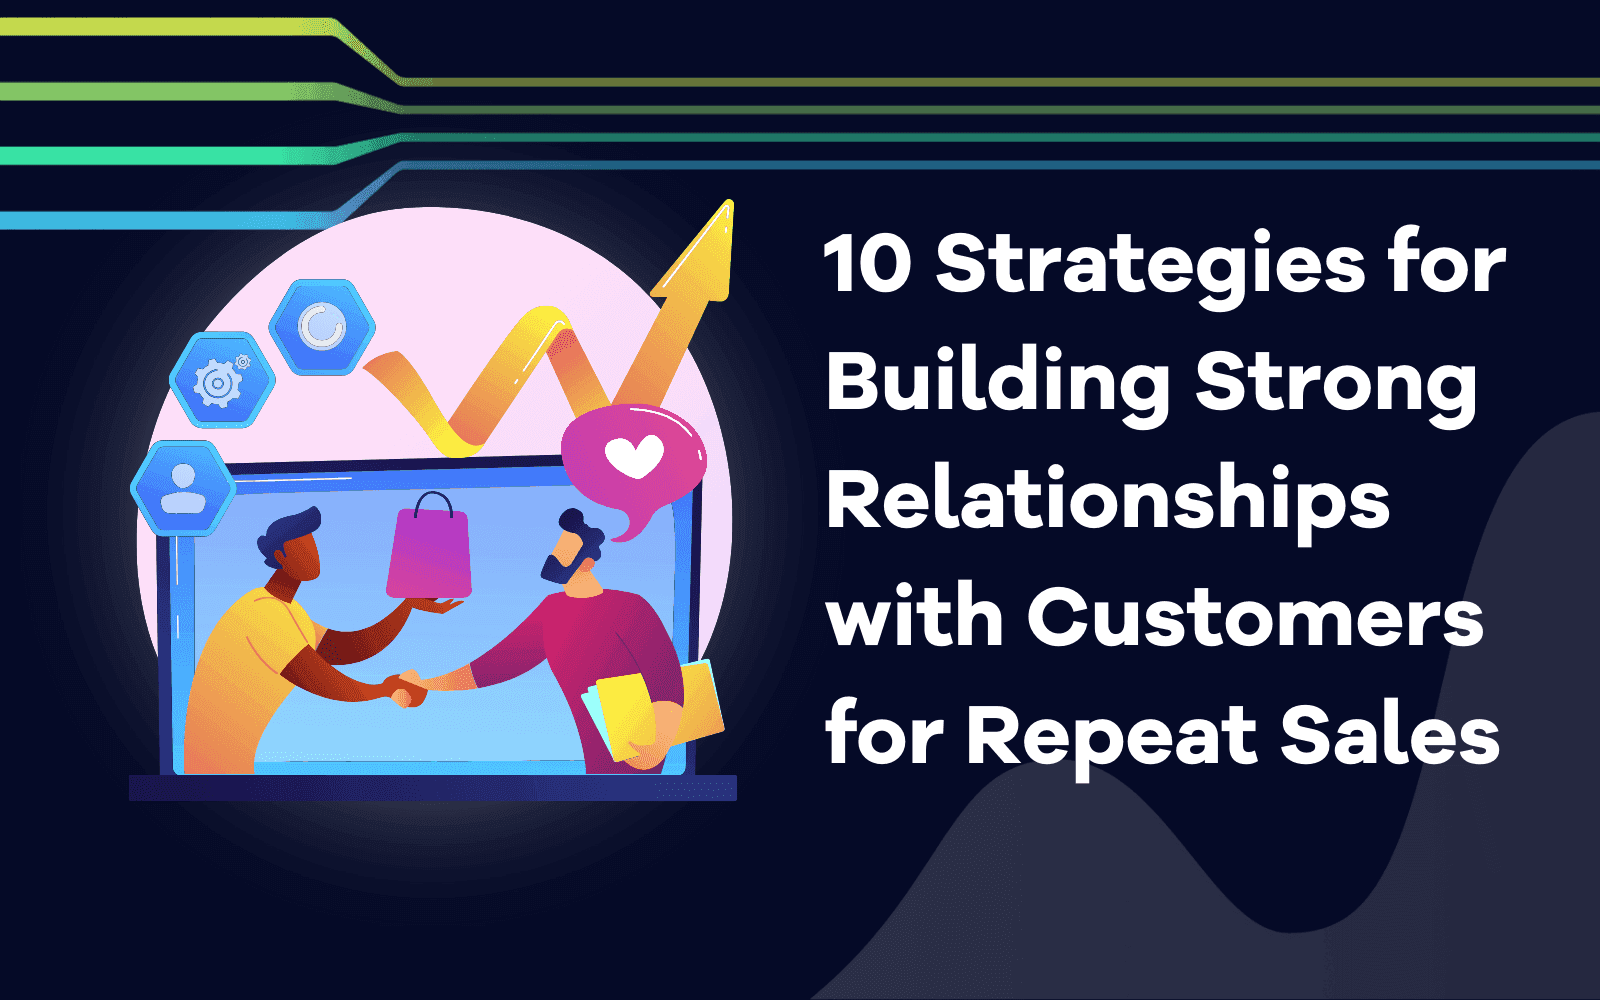 Strategies for Building Strong Relationships with Customers for Repeat Sales